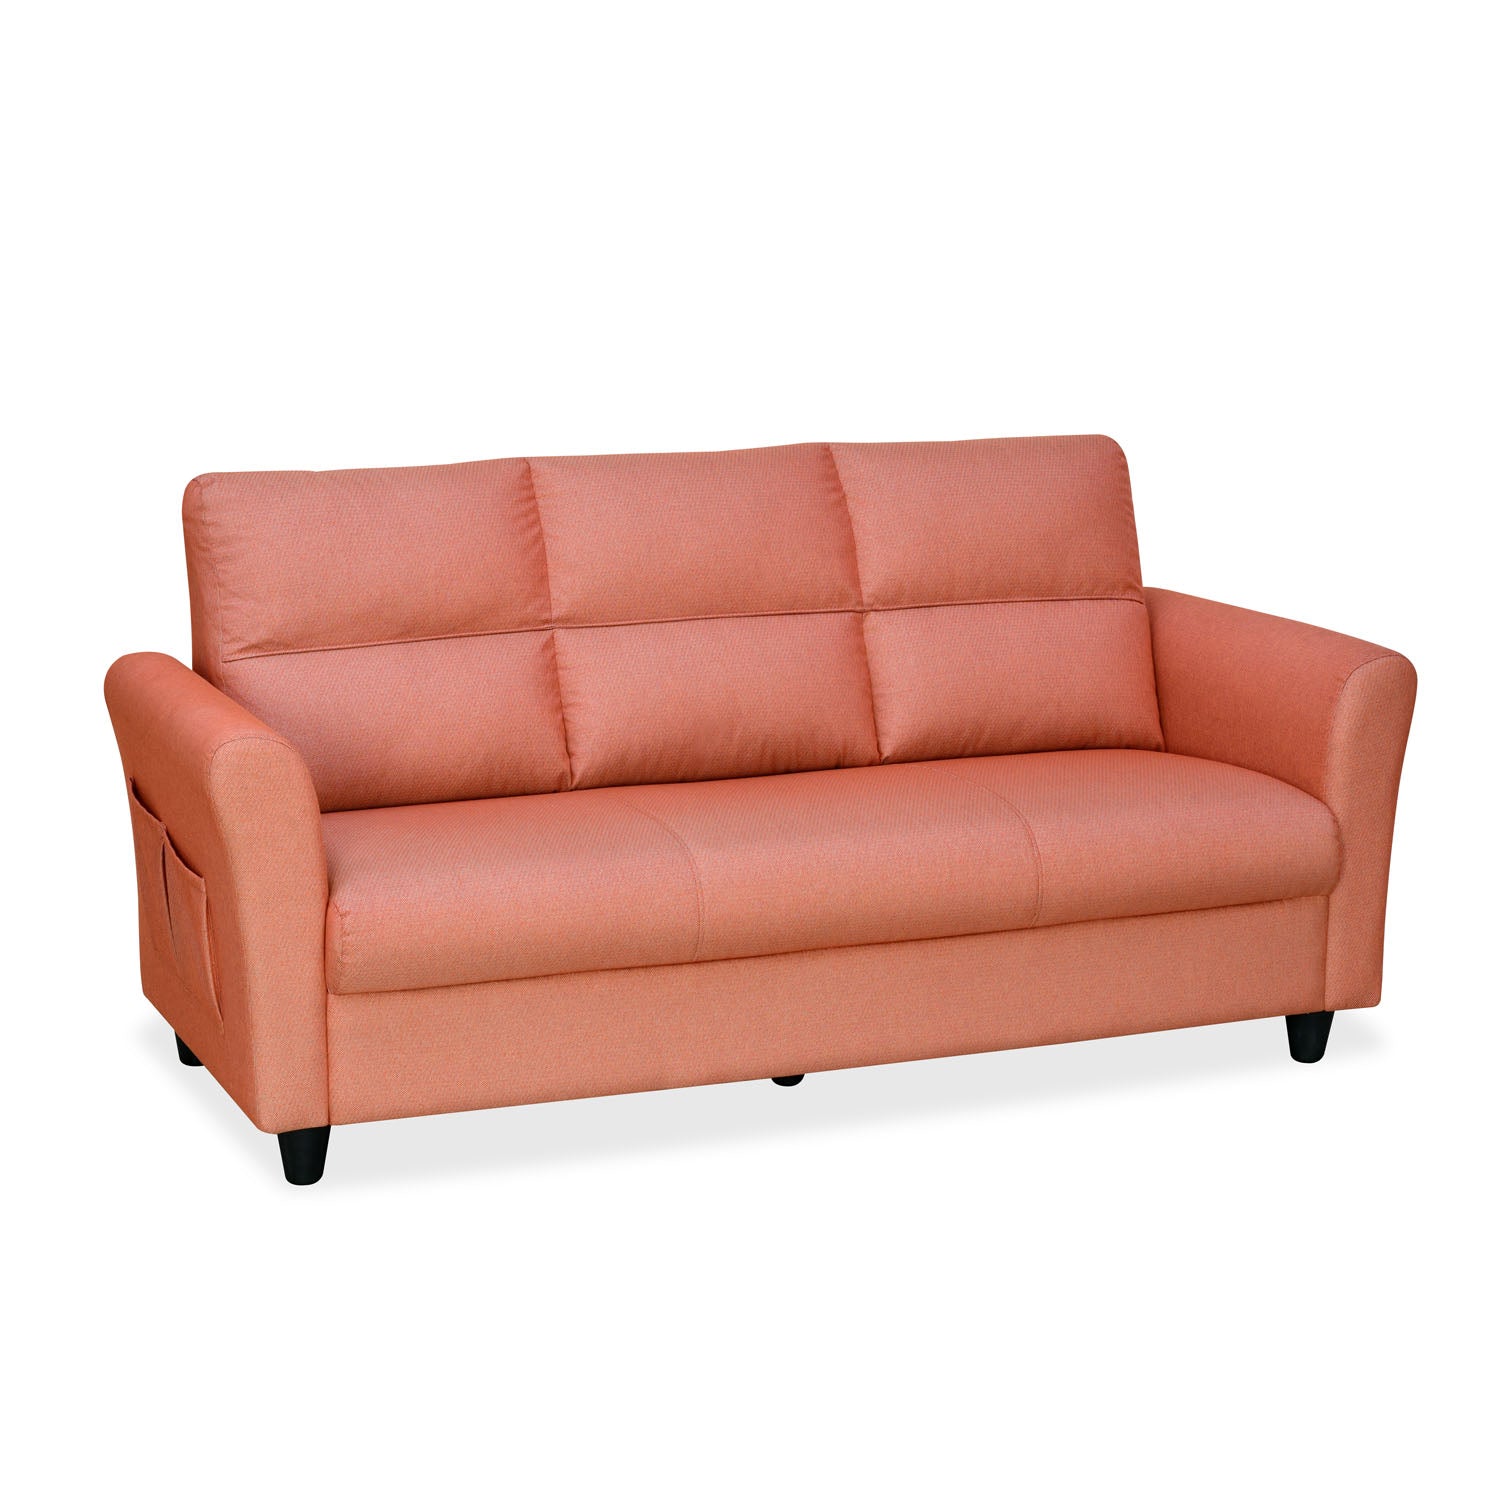 Oliver 3 Seater Fabric Sofa with Side Pocket (Rust)